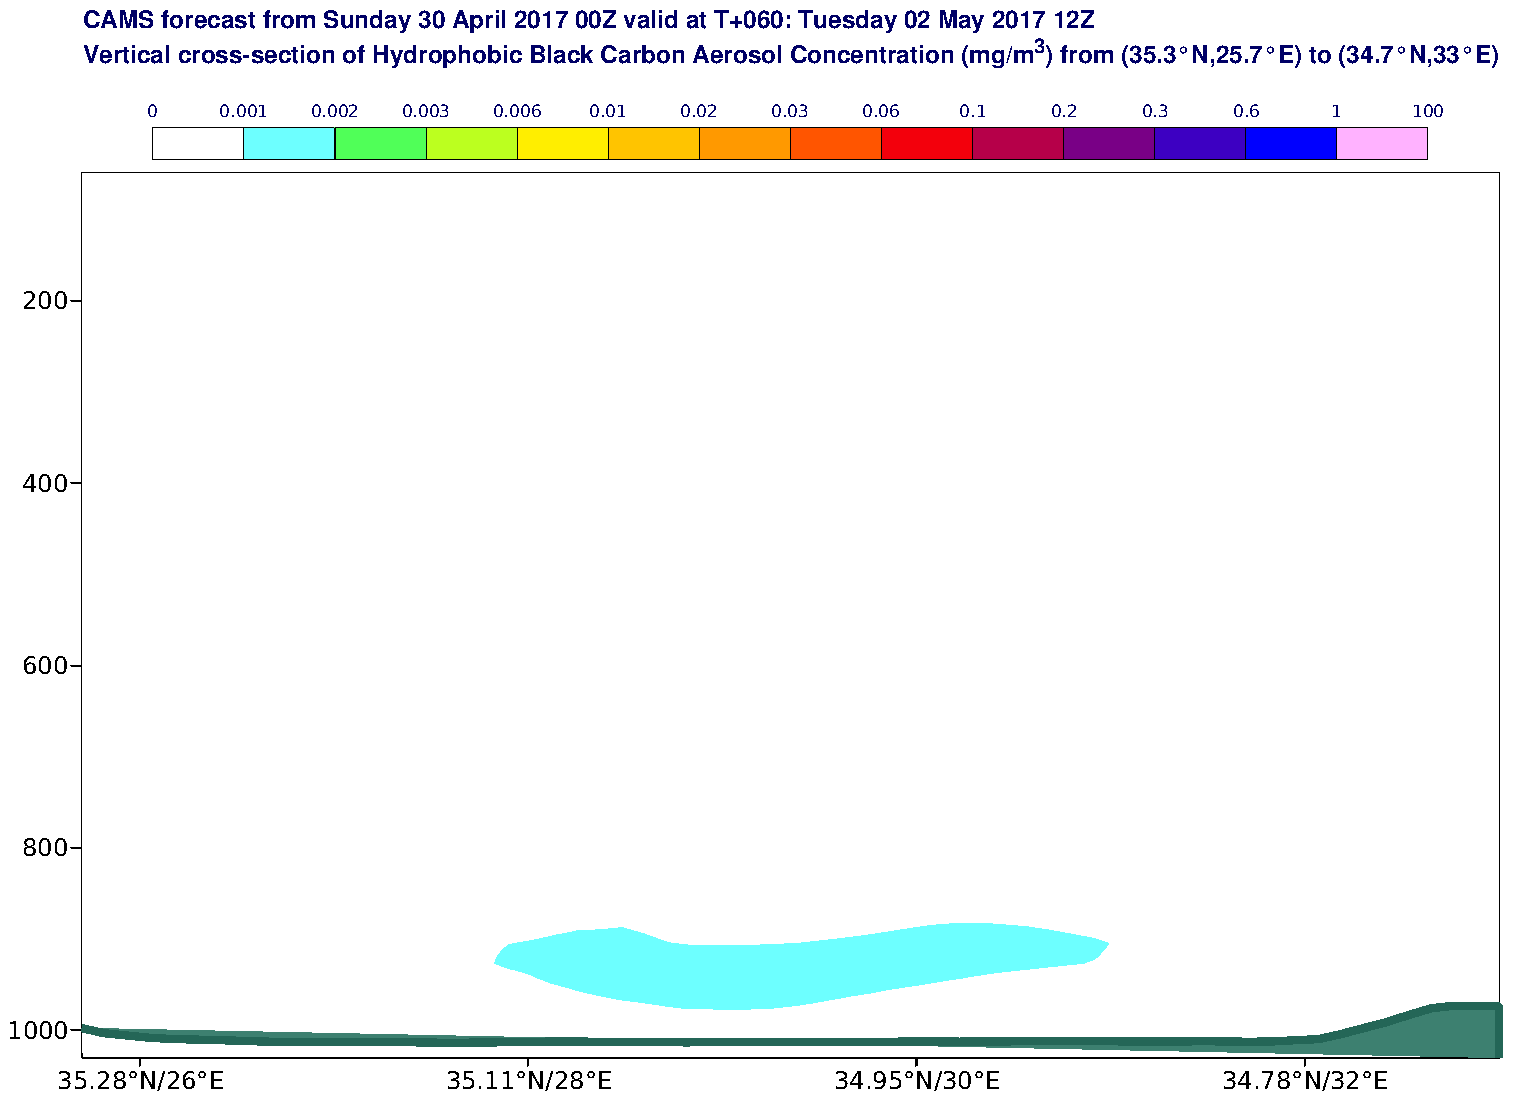 Vertical cross-section of Hydrophobic Black Carbon Aerosol Concentration (mg/m3) valid at T60 - 2017-05-02 12:00